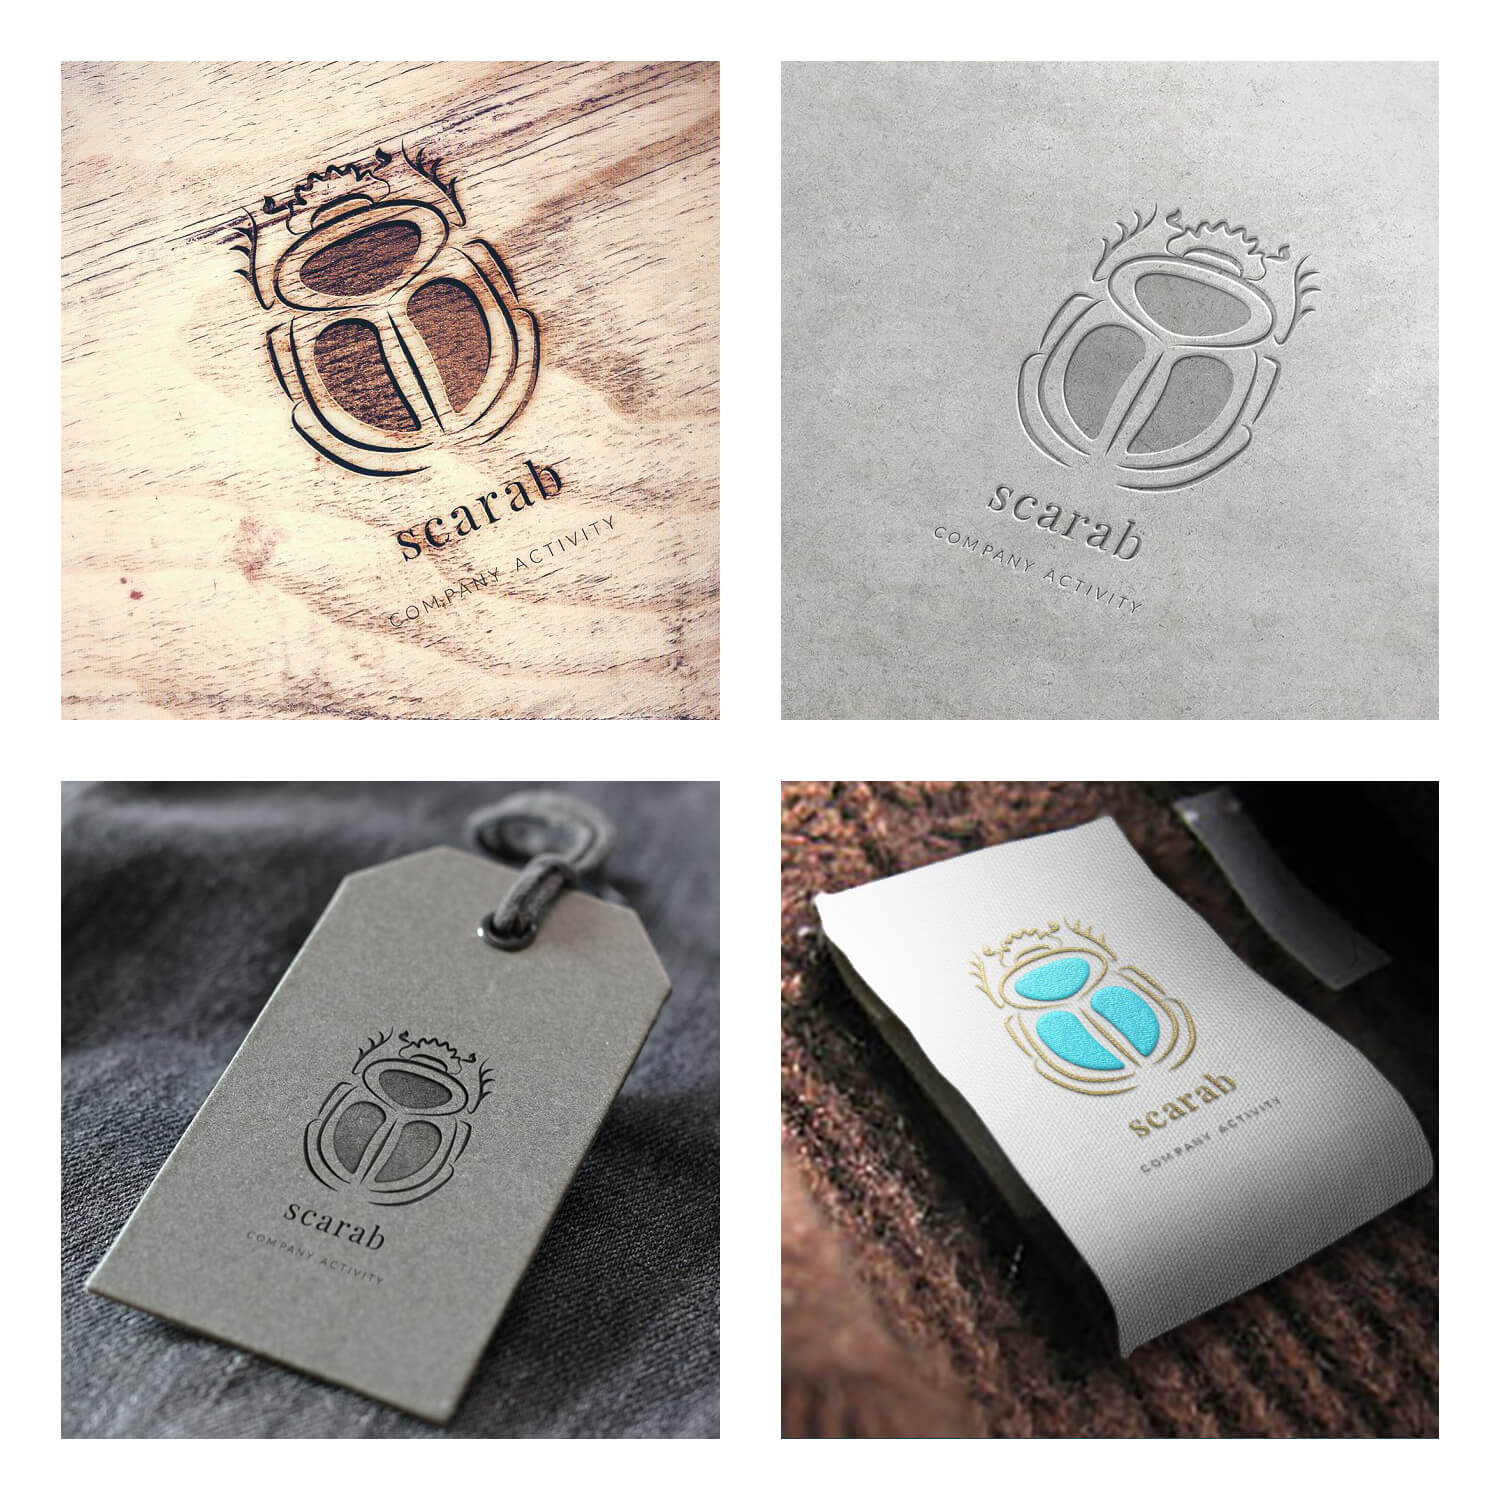 Four pictures of the scarab logo on white, gray and beige backgrounds.